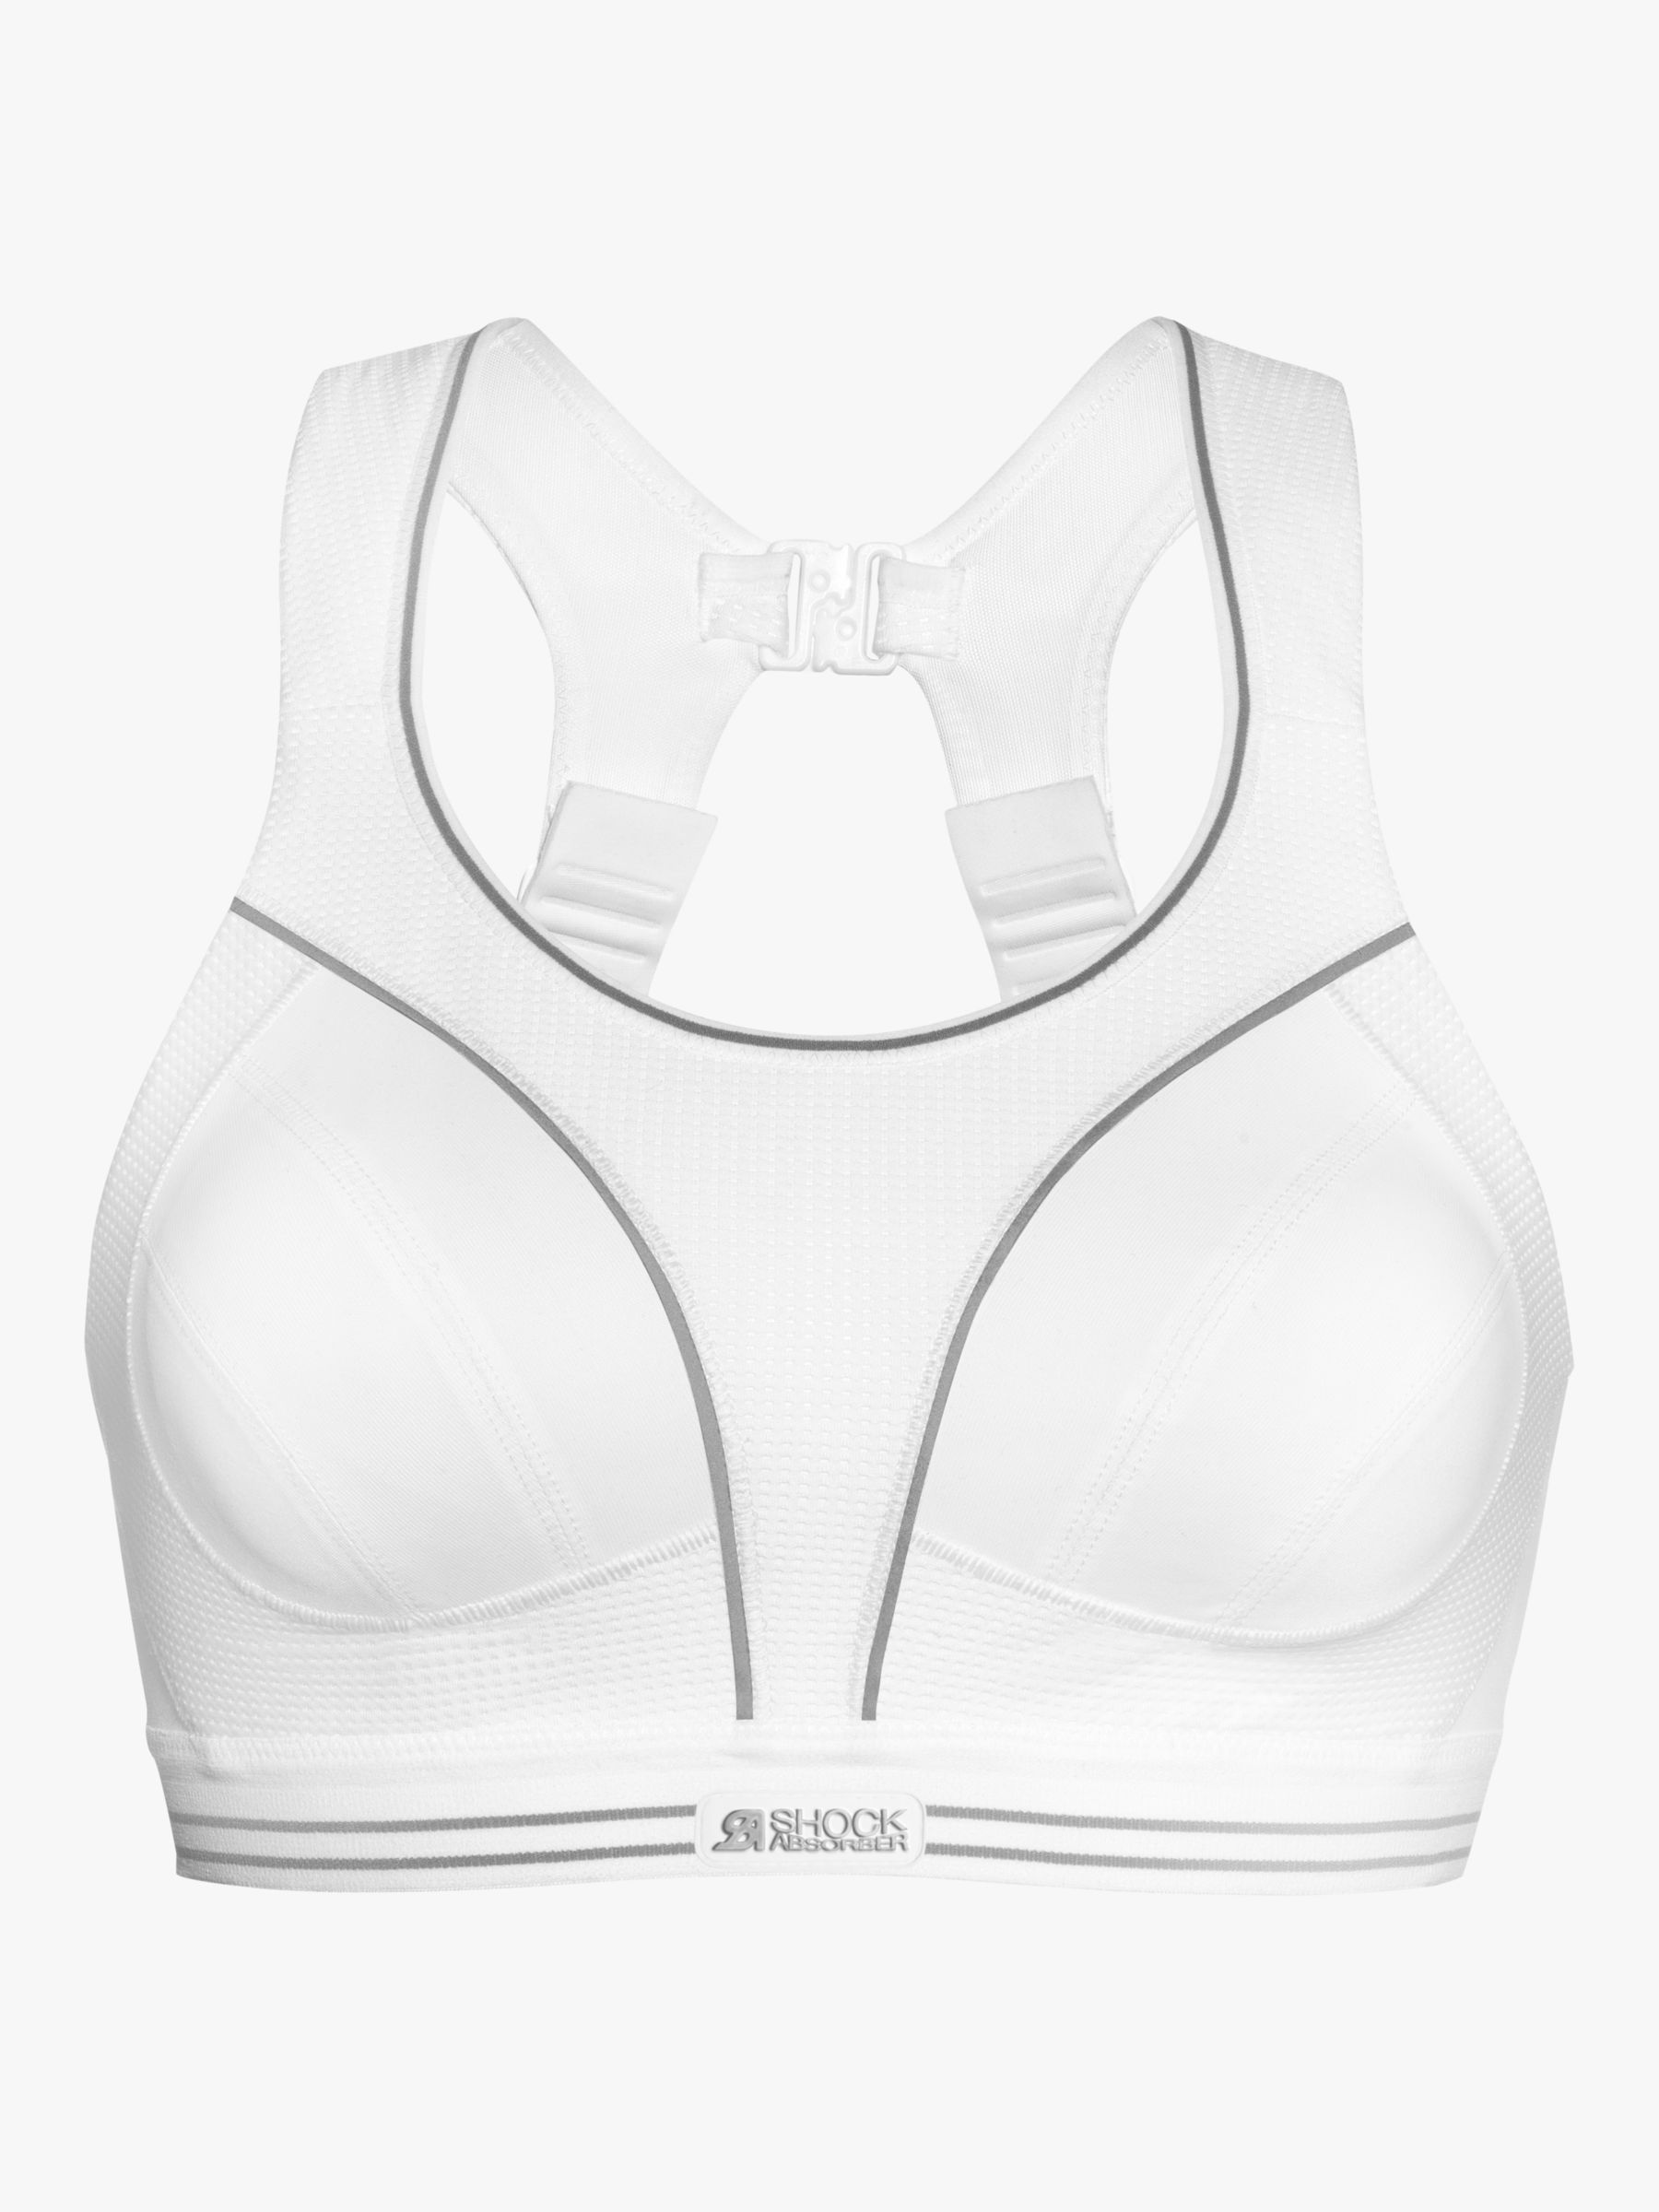 Shock Absorber Ultimate Run Non-Wired Sports Bra, White, 32B